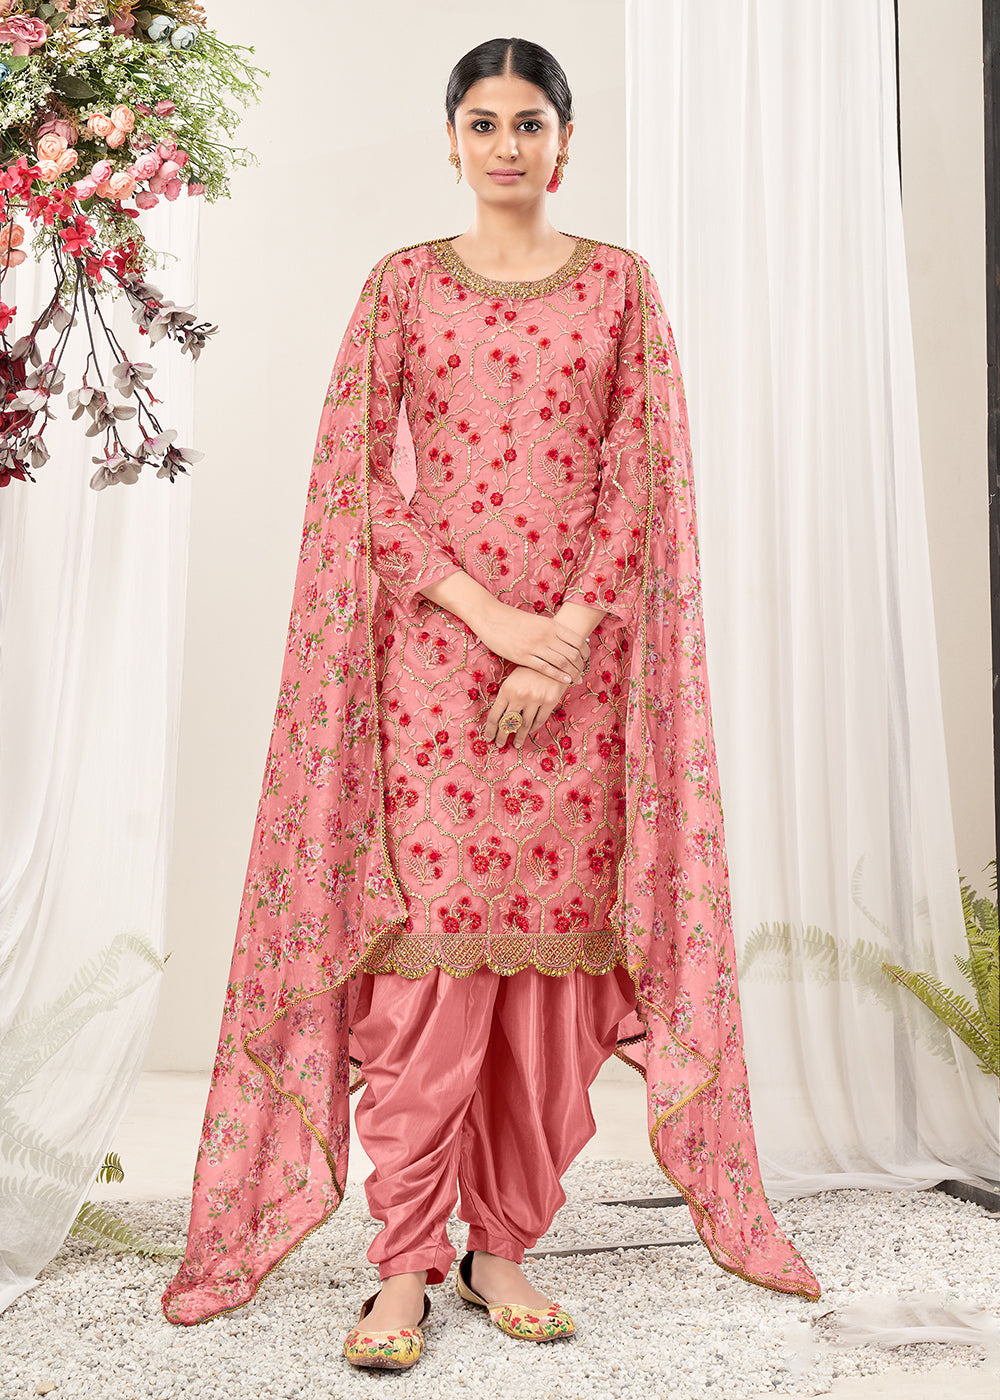 Buy Now Exclusive Pink Festive Look Net Patiala Salwar Suit Online in USA, UK, Canada, Germany, Australia & Worldwide at Empress Clothing.